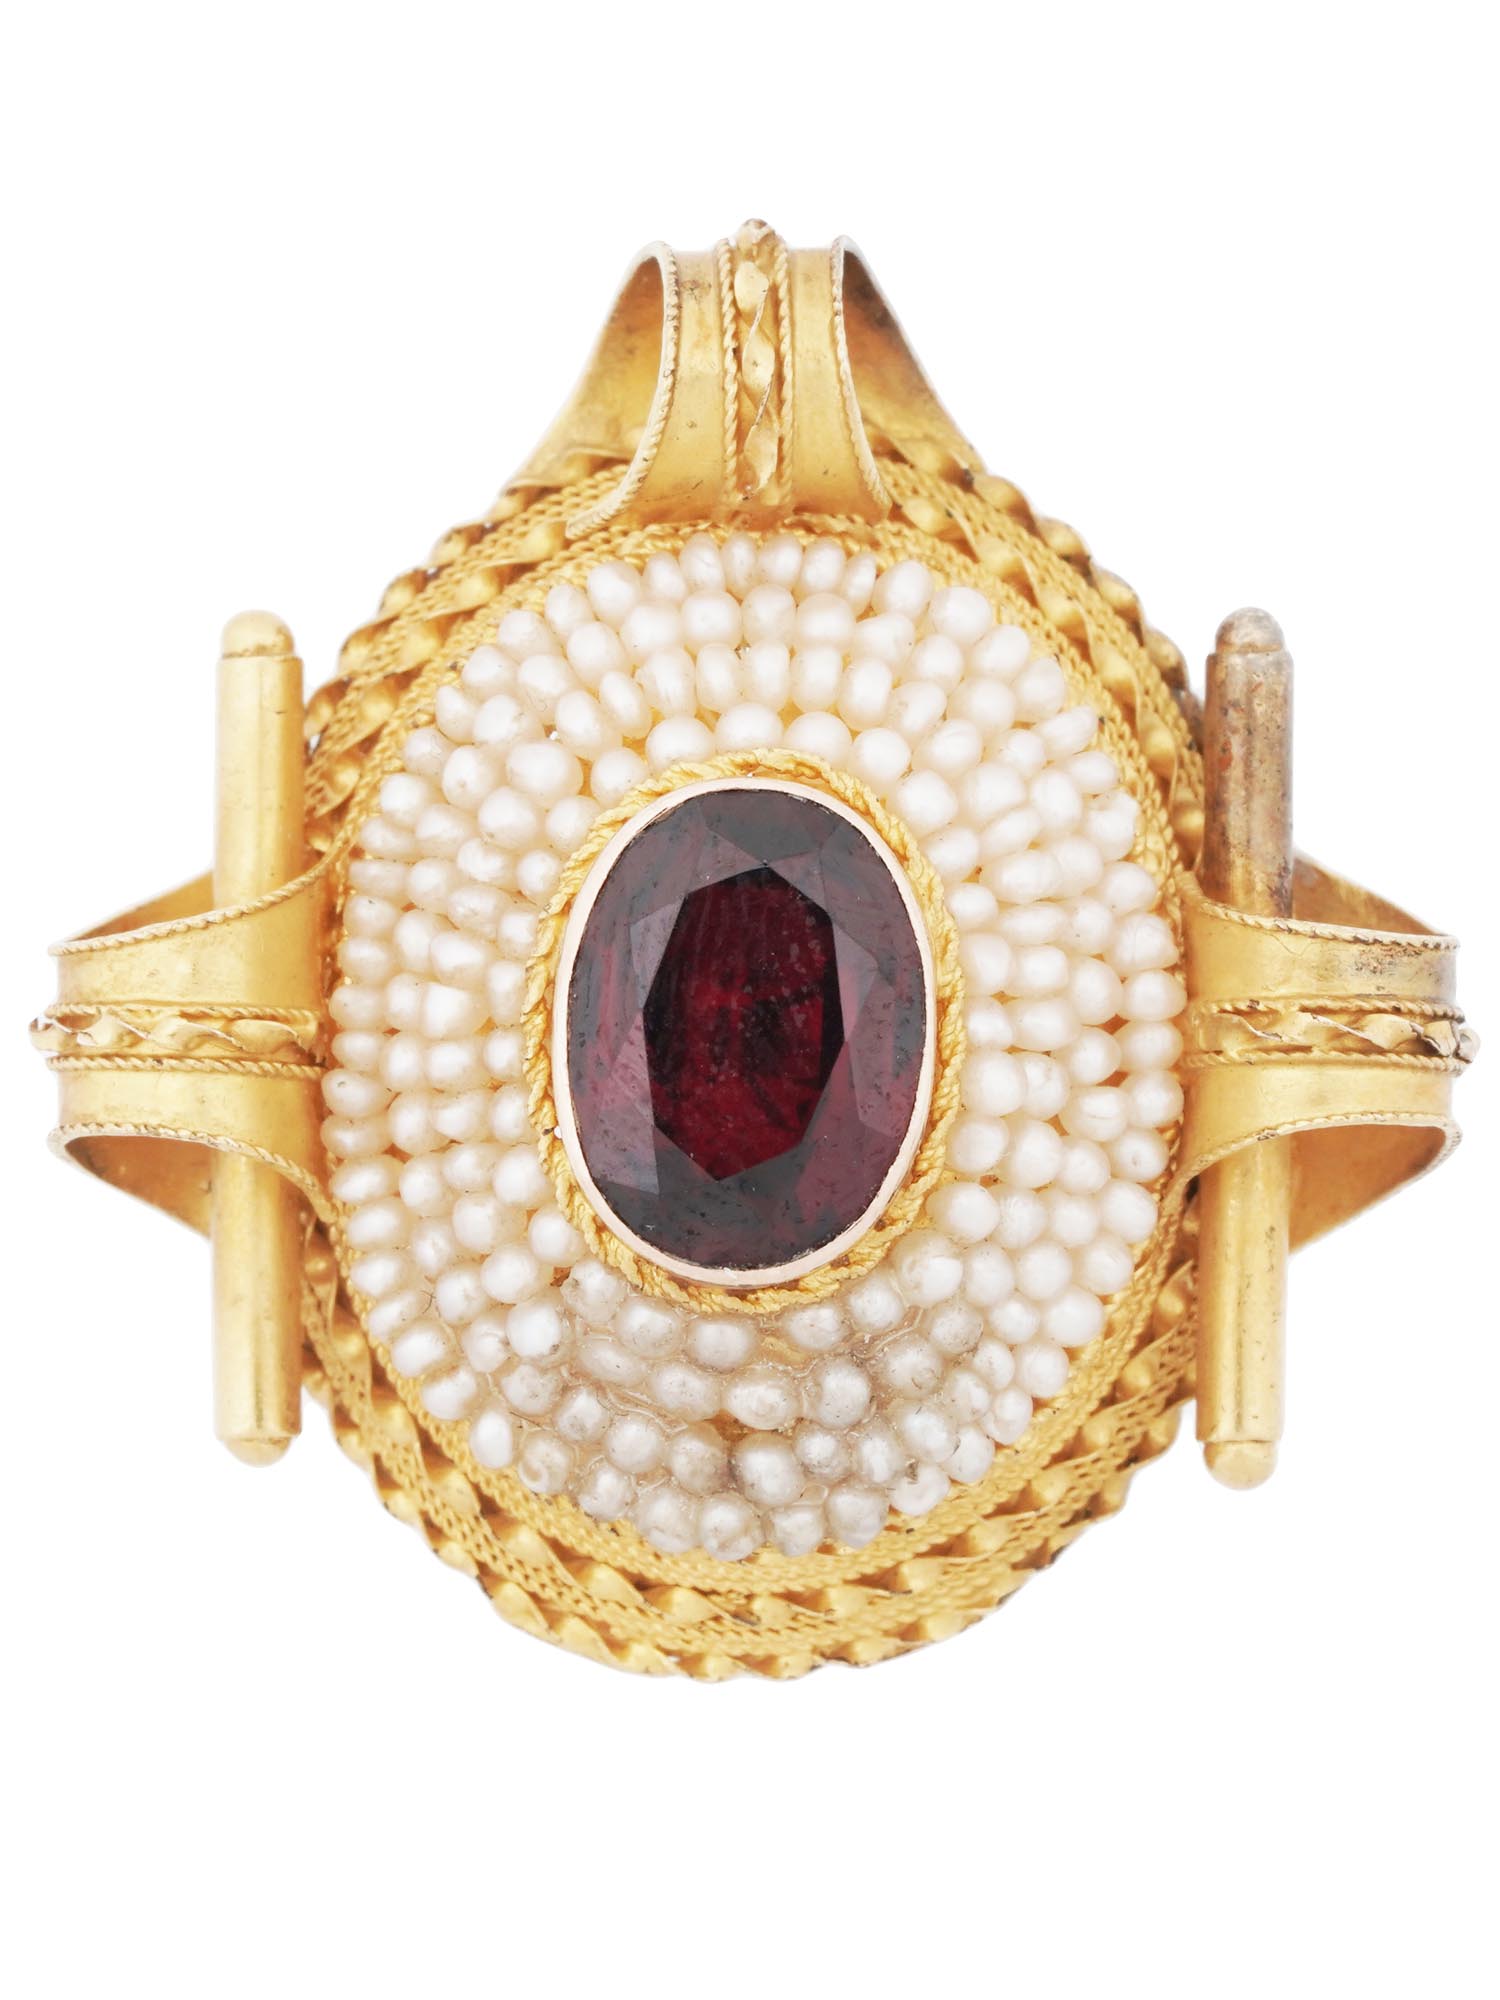 14K GOLD PENDANT WITH SEED PEARLS AND GARNET PIC-0